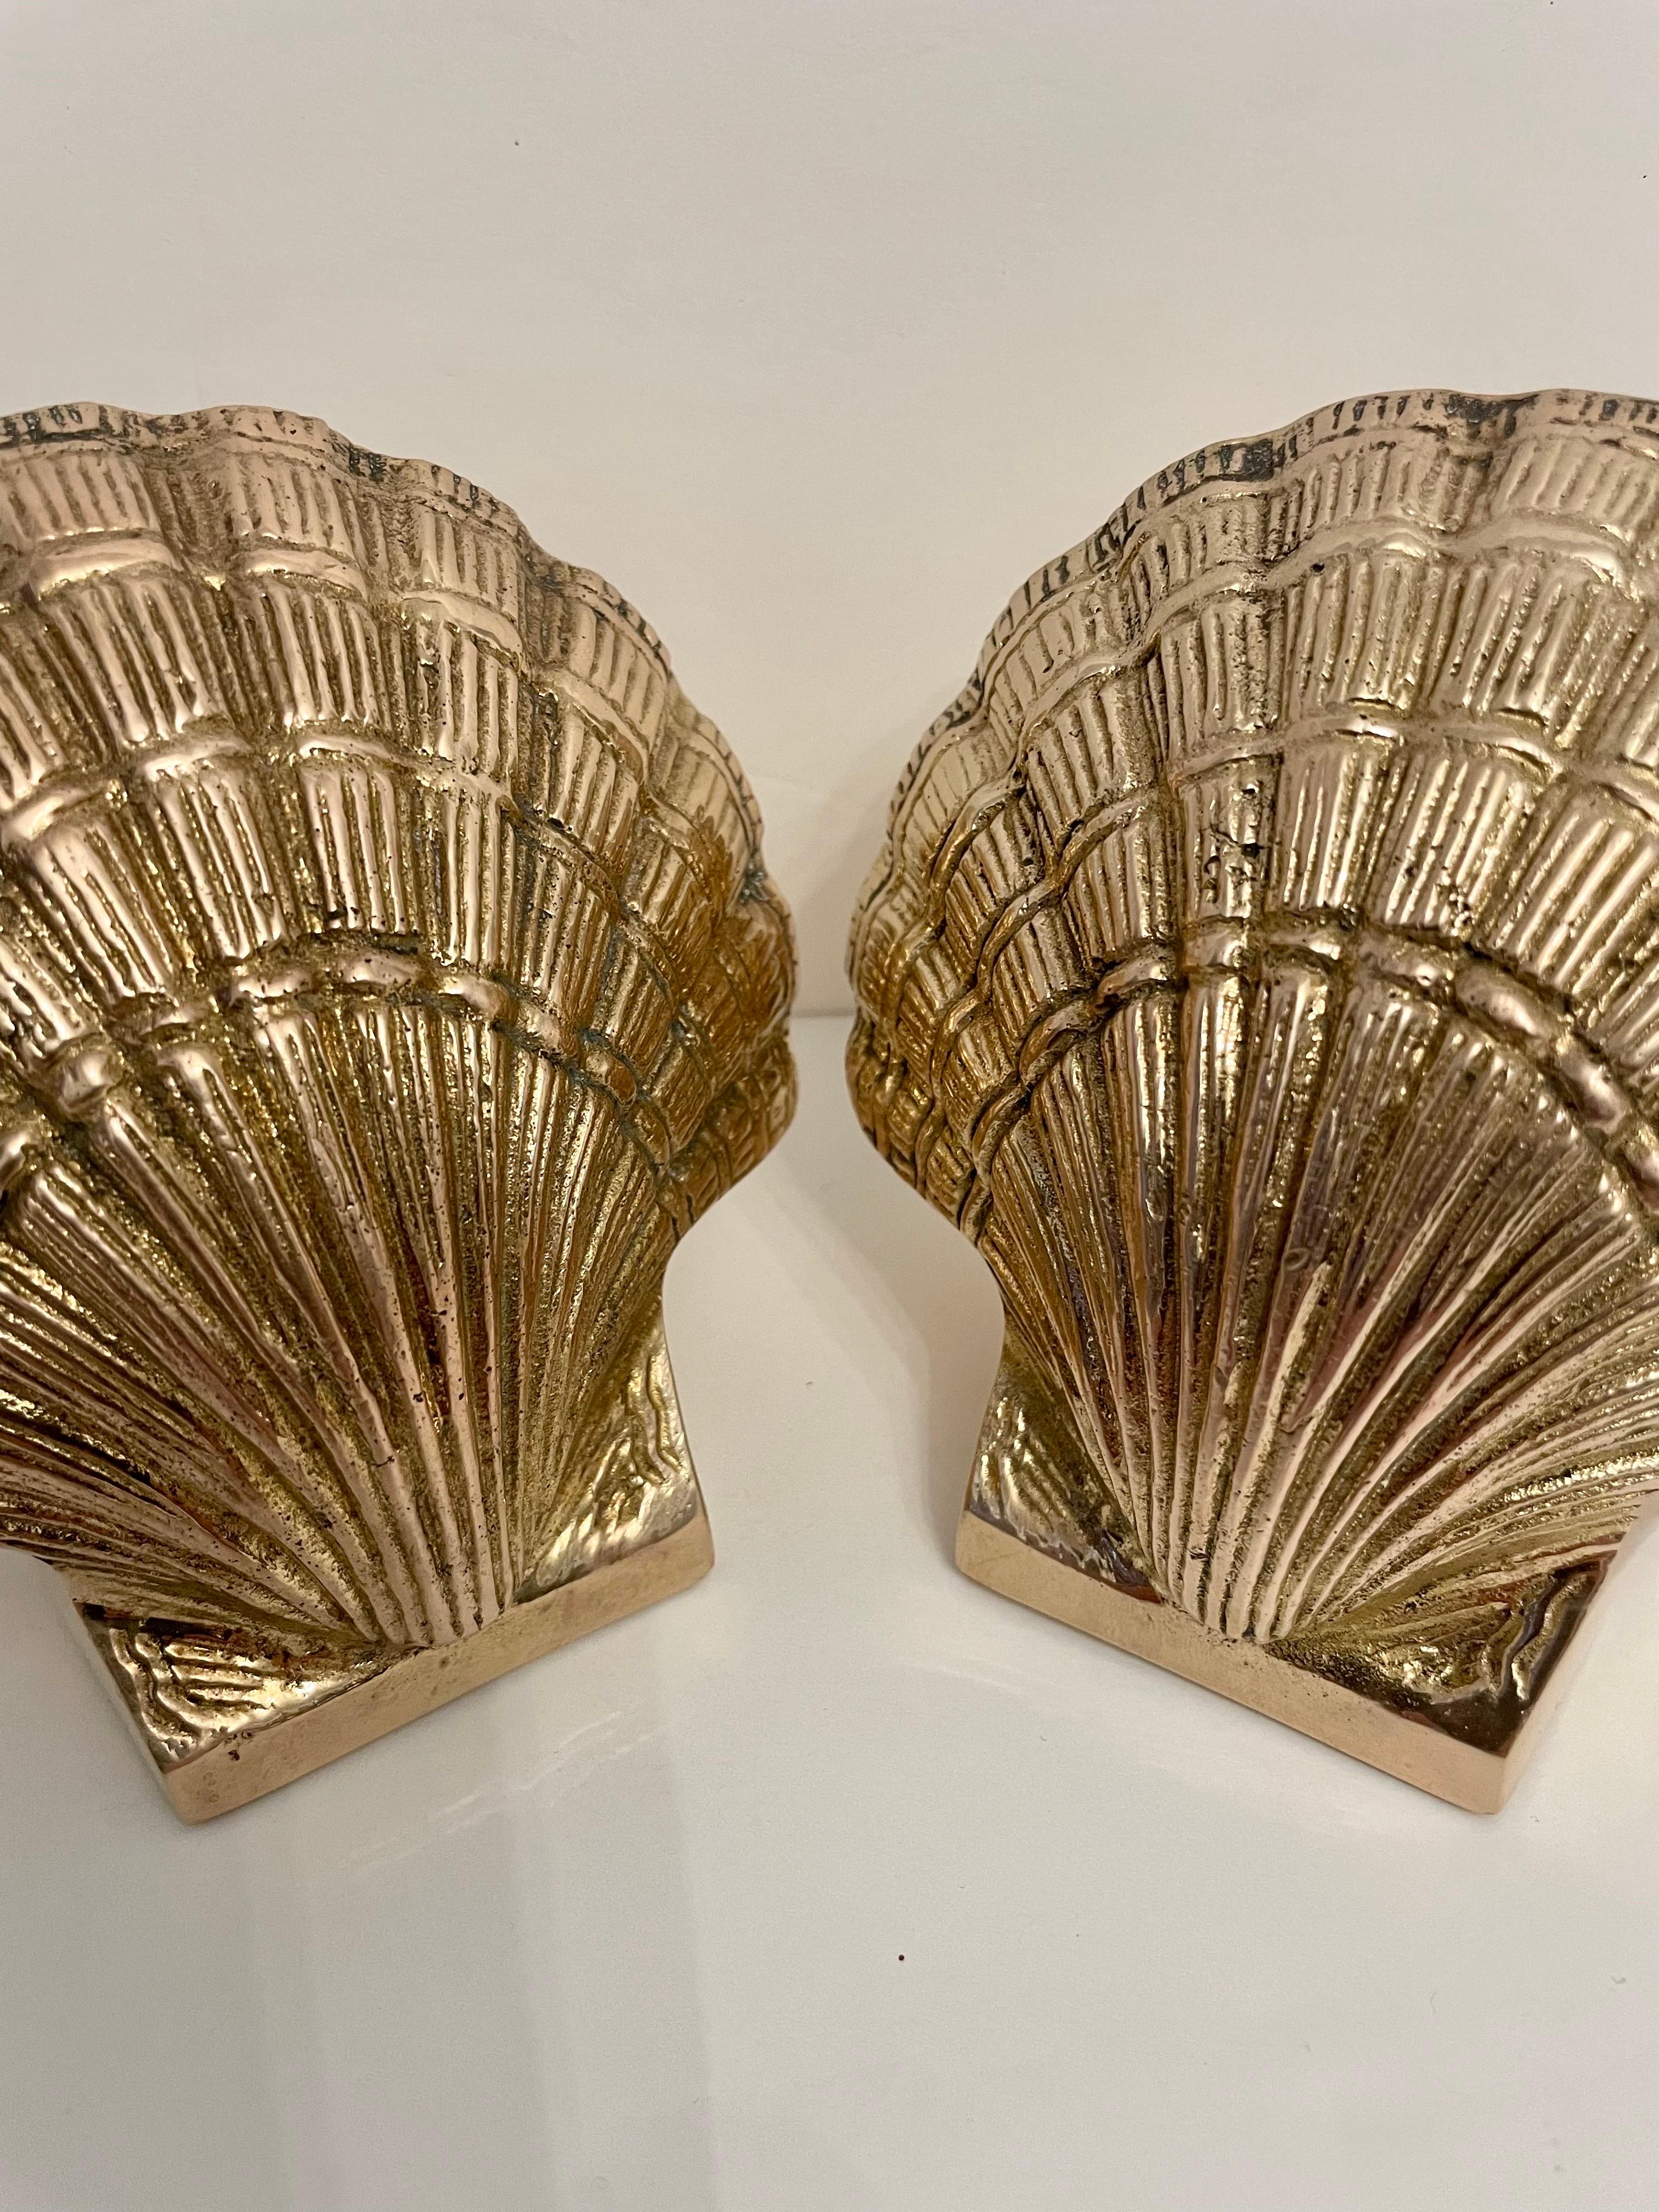 American Pair Brass Scallop Or Clam Shell Seashell Bookends